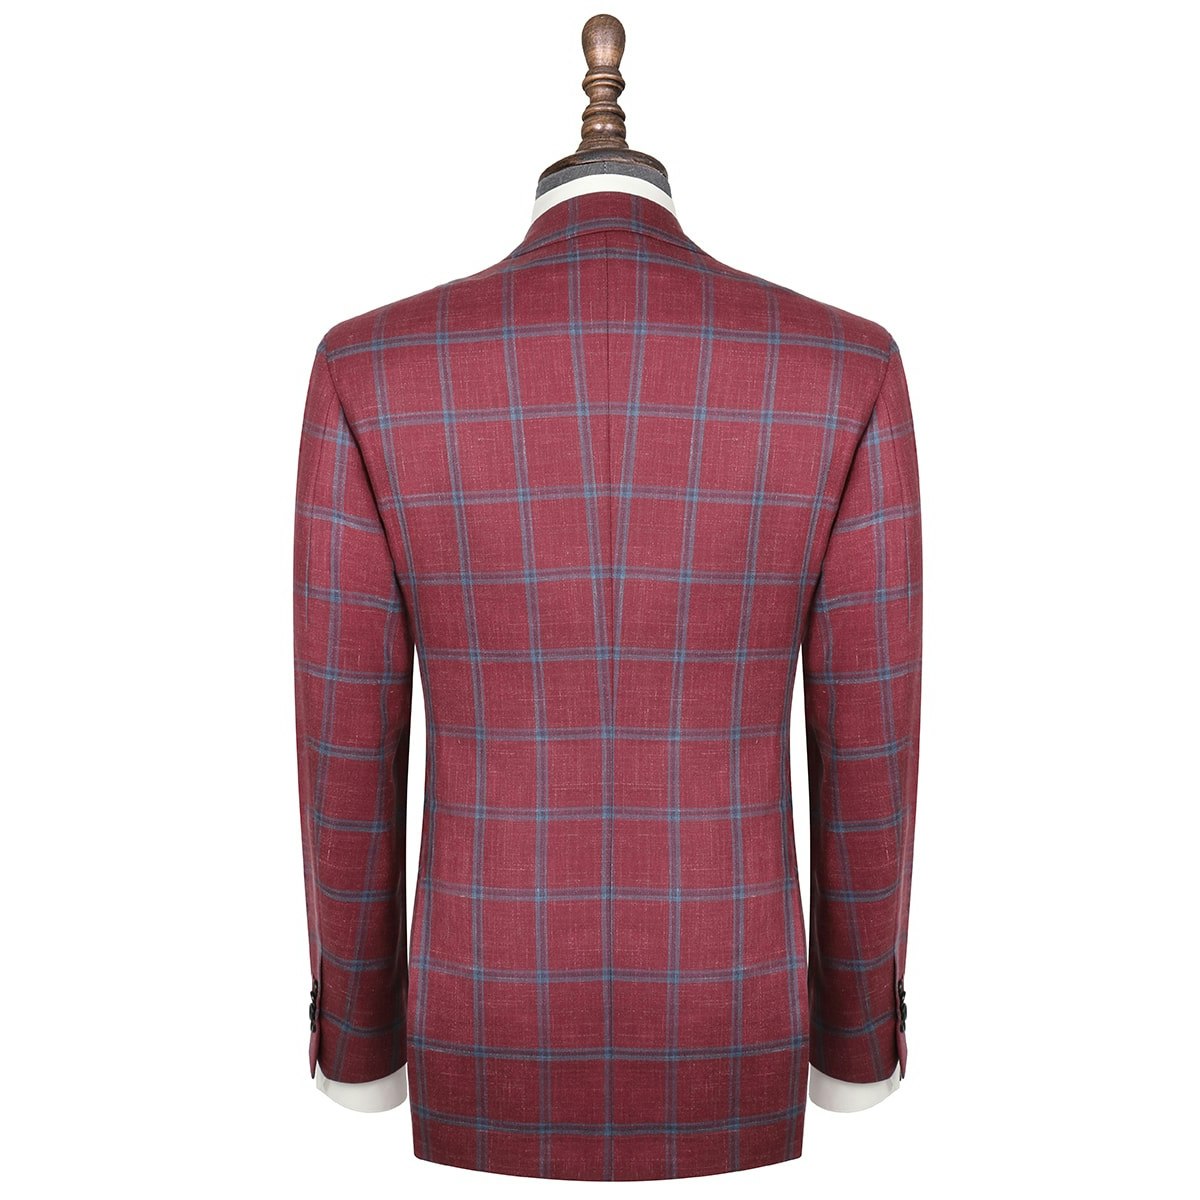 InStitchu Collection McEvoy Maroon and Blue Prince Of Wales Wool Blend Jacket